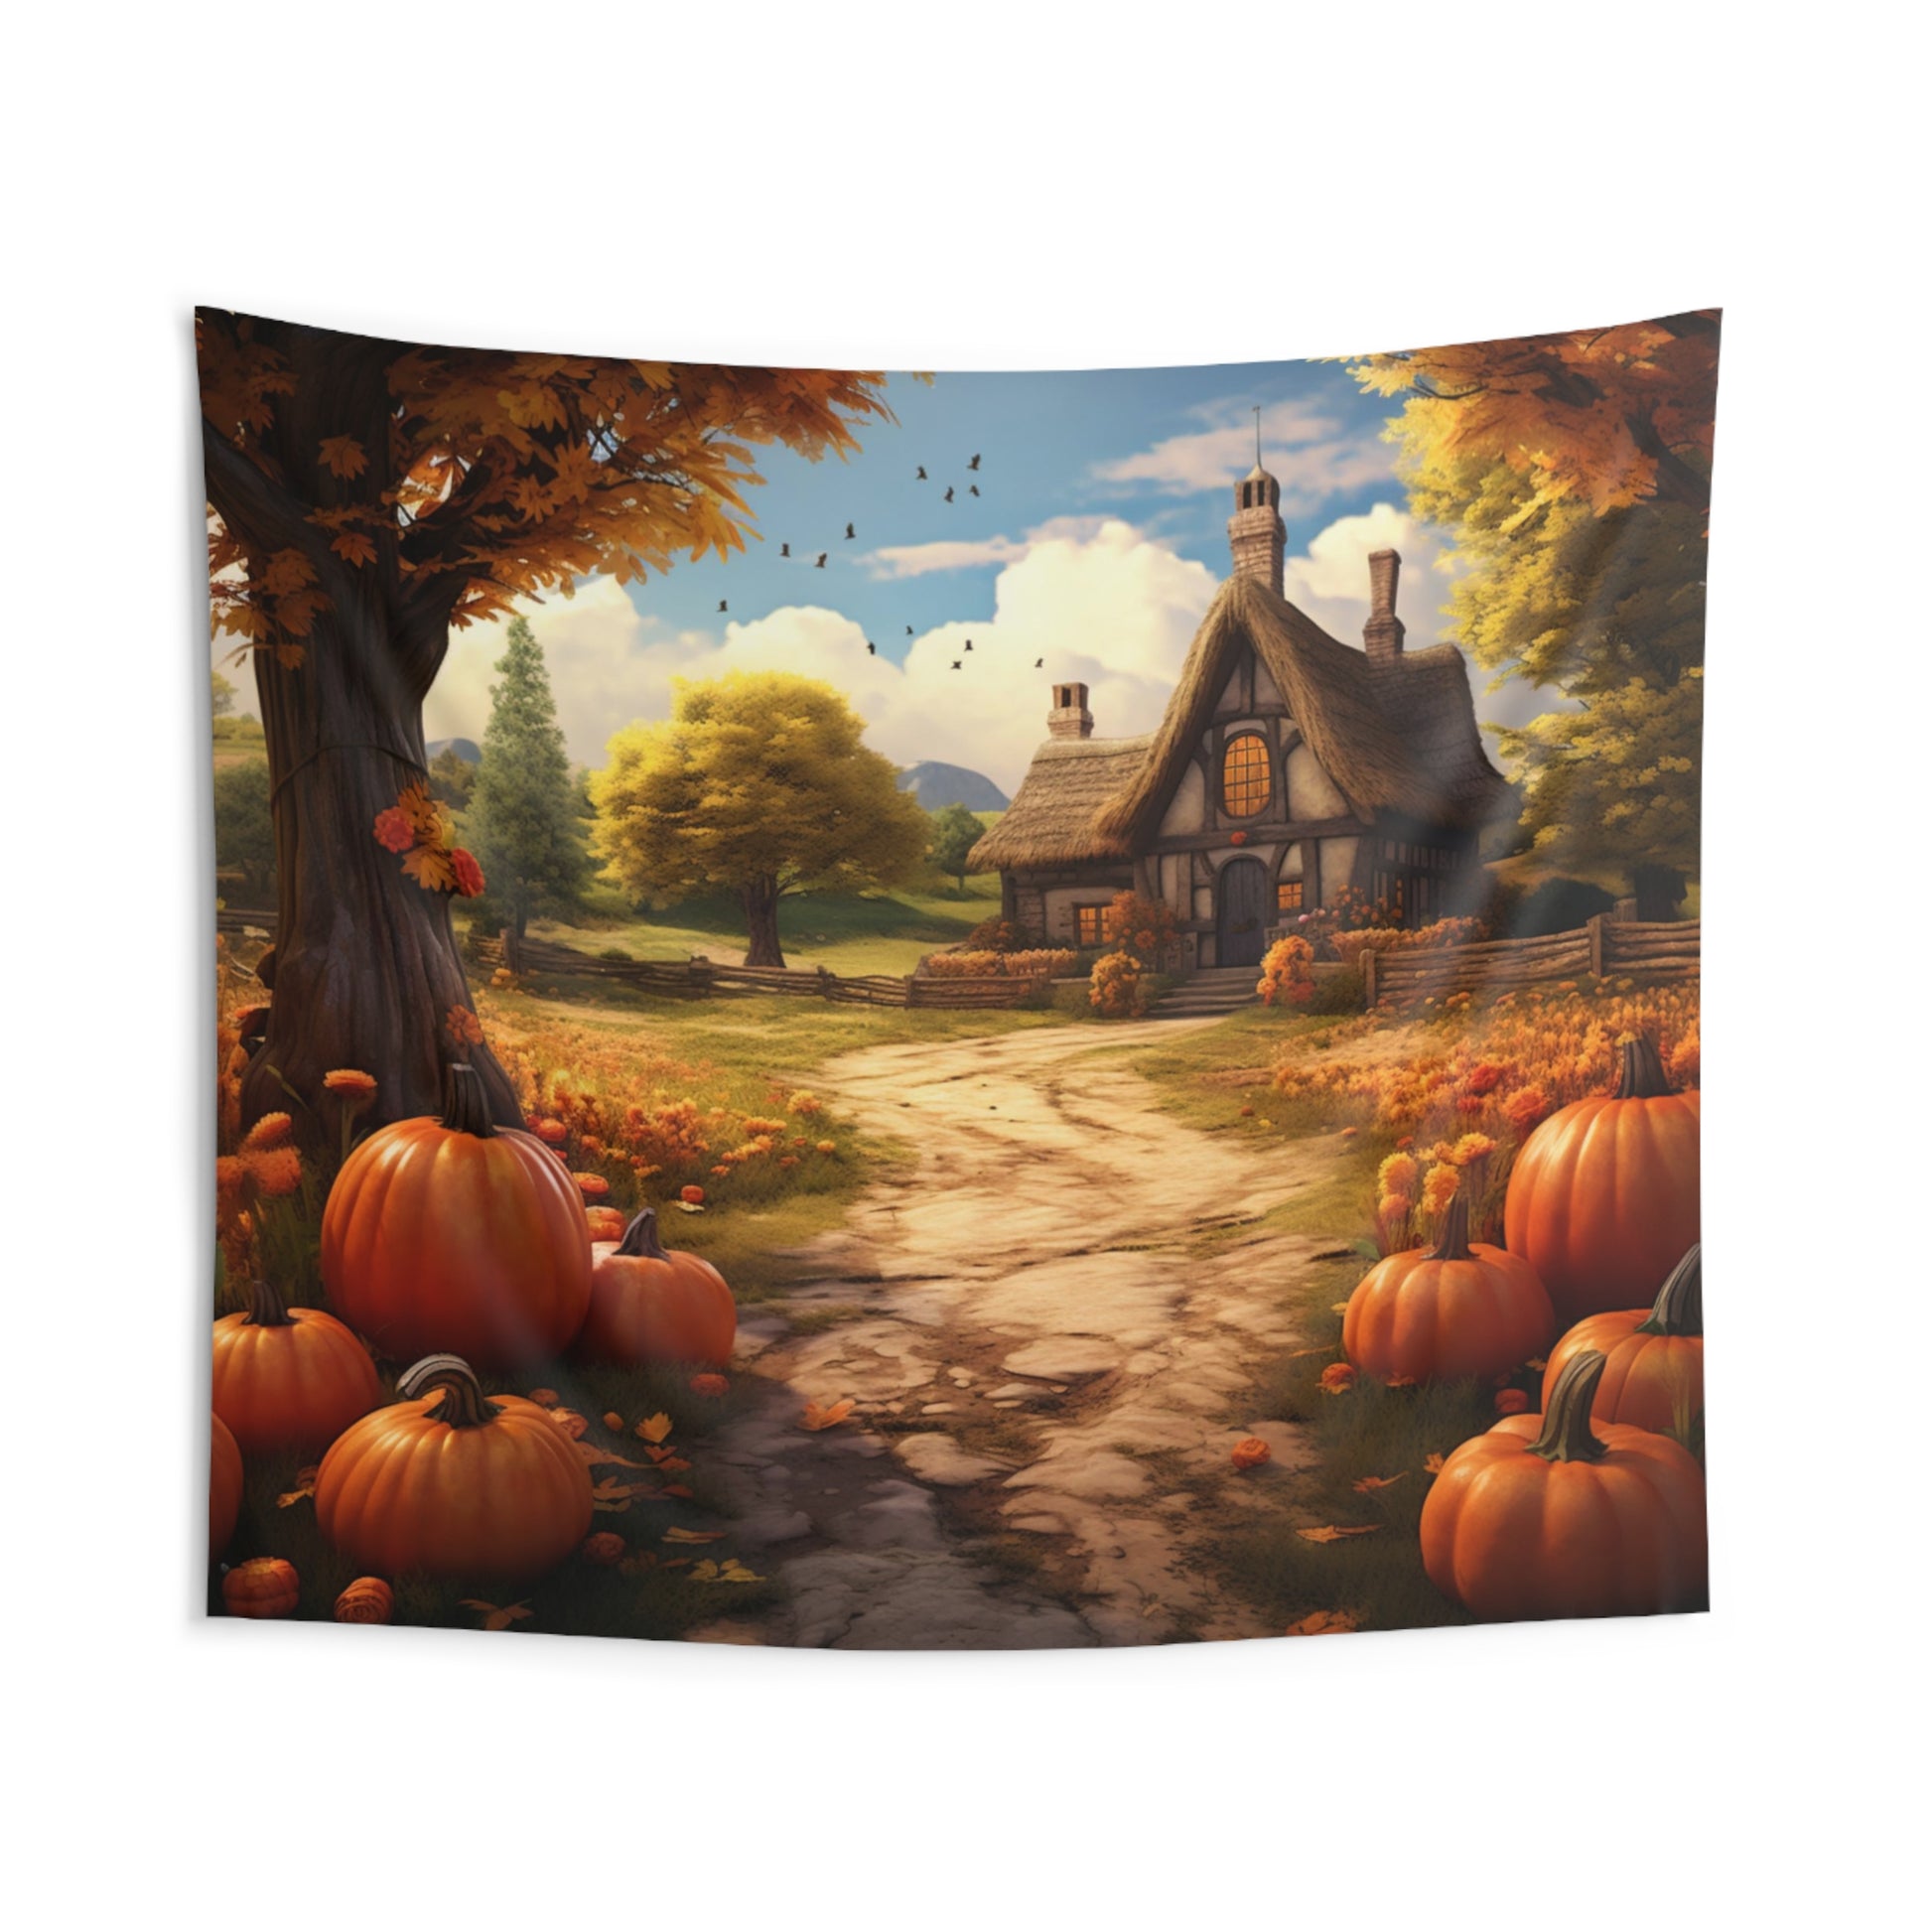 Pumpkin Patch Tapestry, Fall Autumn Leaves Cottage Wall Art Hanging Unique Landscape Aesthetic Large Small Bedroom College Dorm Room Starcove Fashion